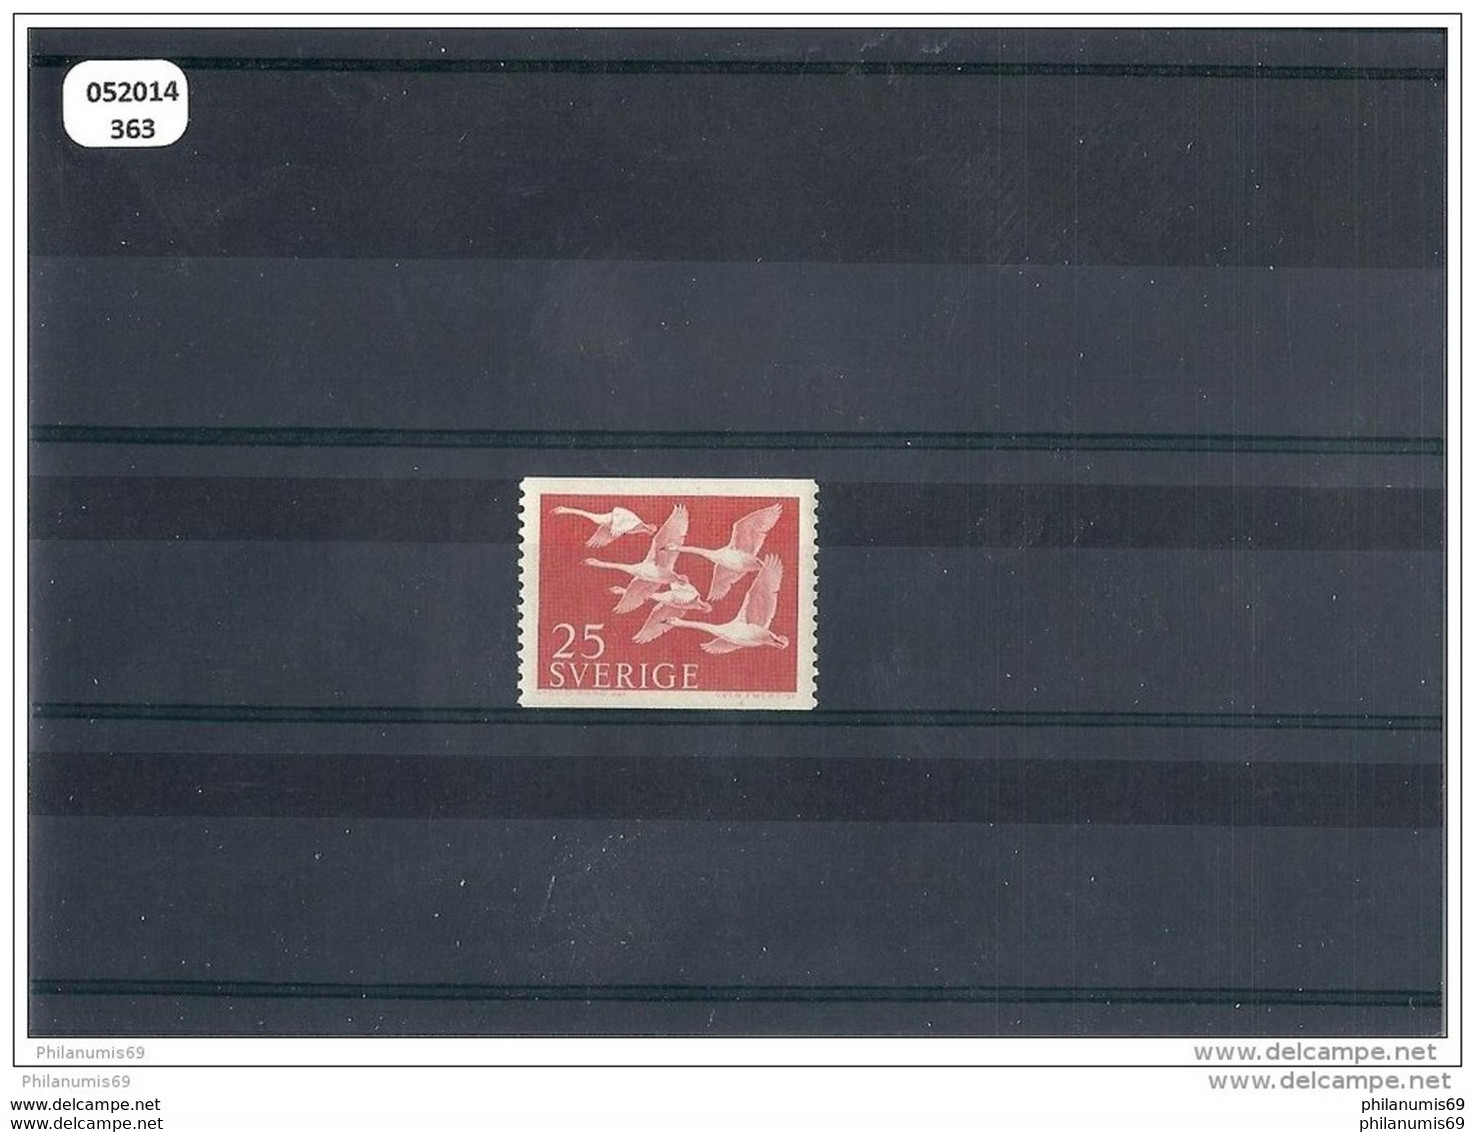 SUEDE 1956 - YT N° 409 NEUF SANS CHARNIERE ** (MNH) GOMME D'ORIGINE LUXE - Unused Stamps